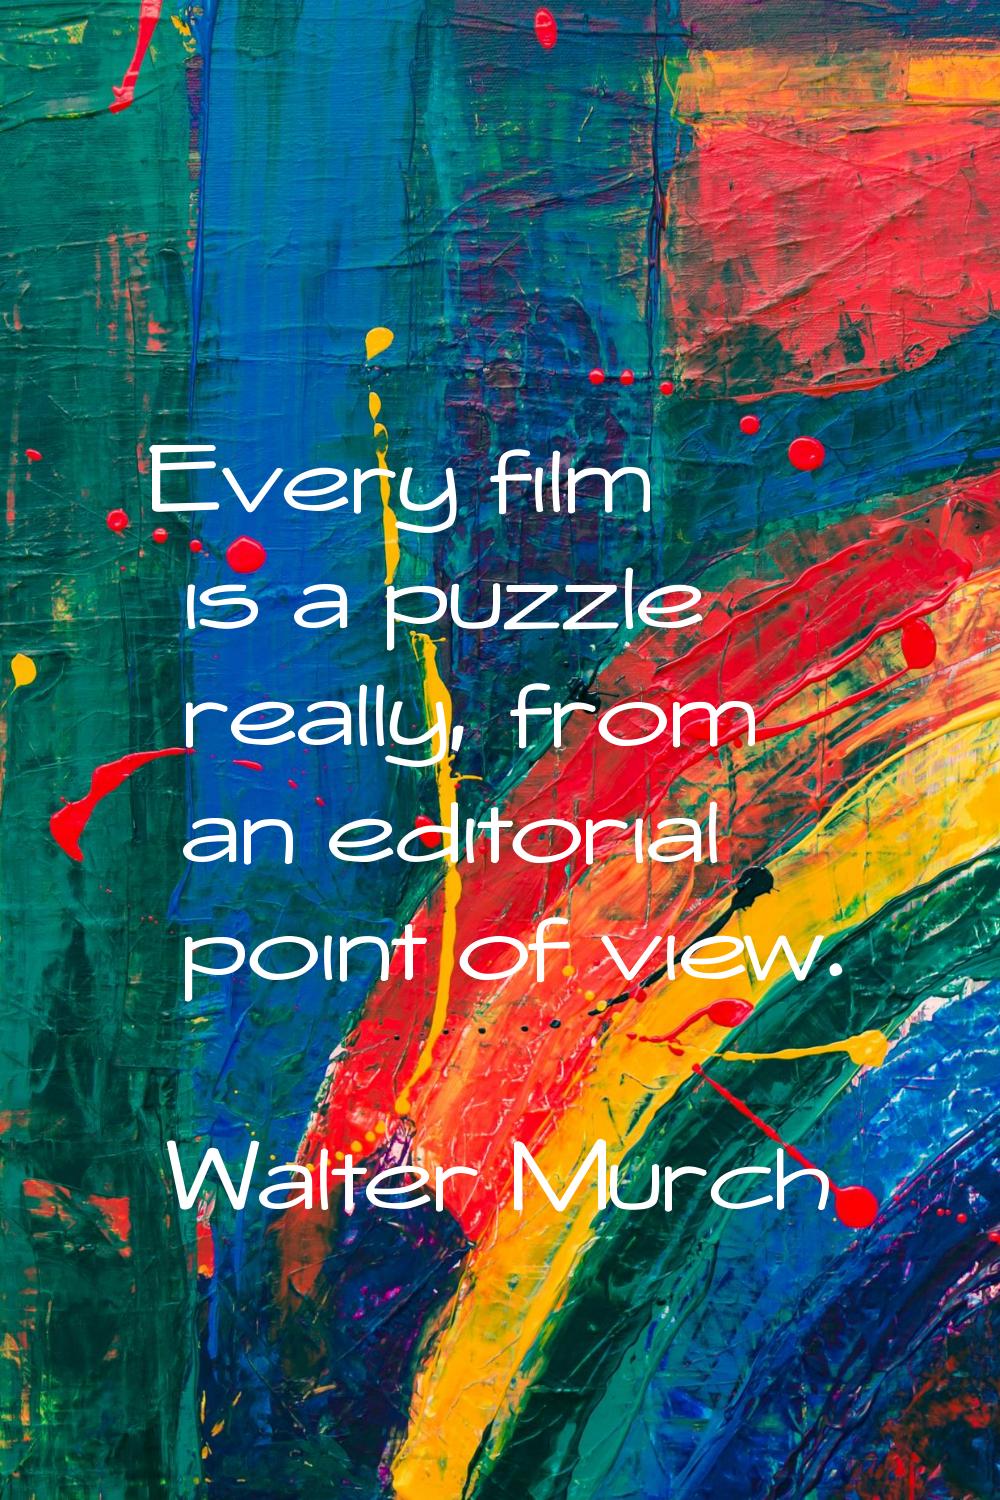 Every film is a puzzle really, from an editorial point of view.